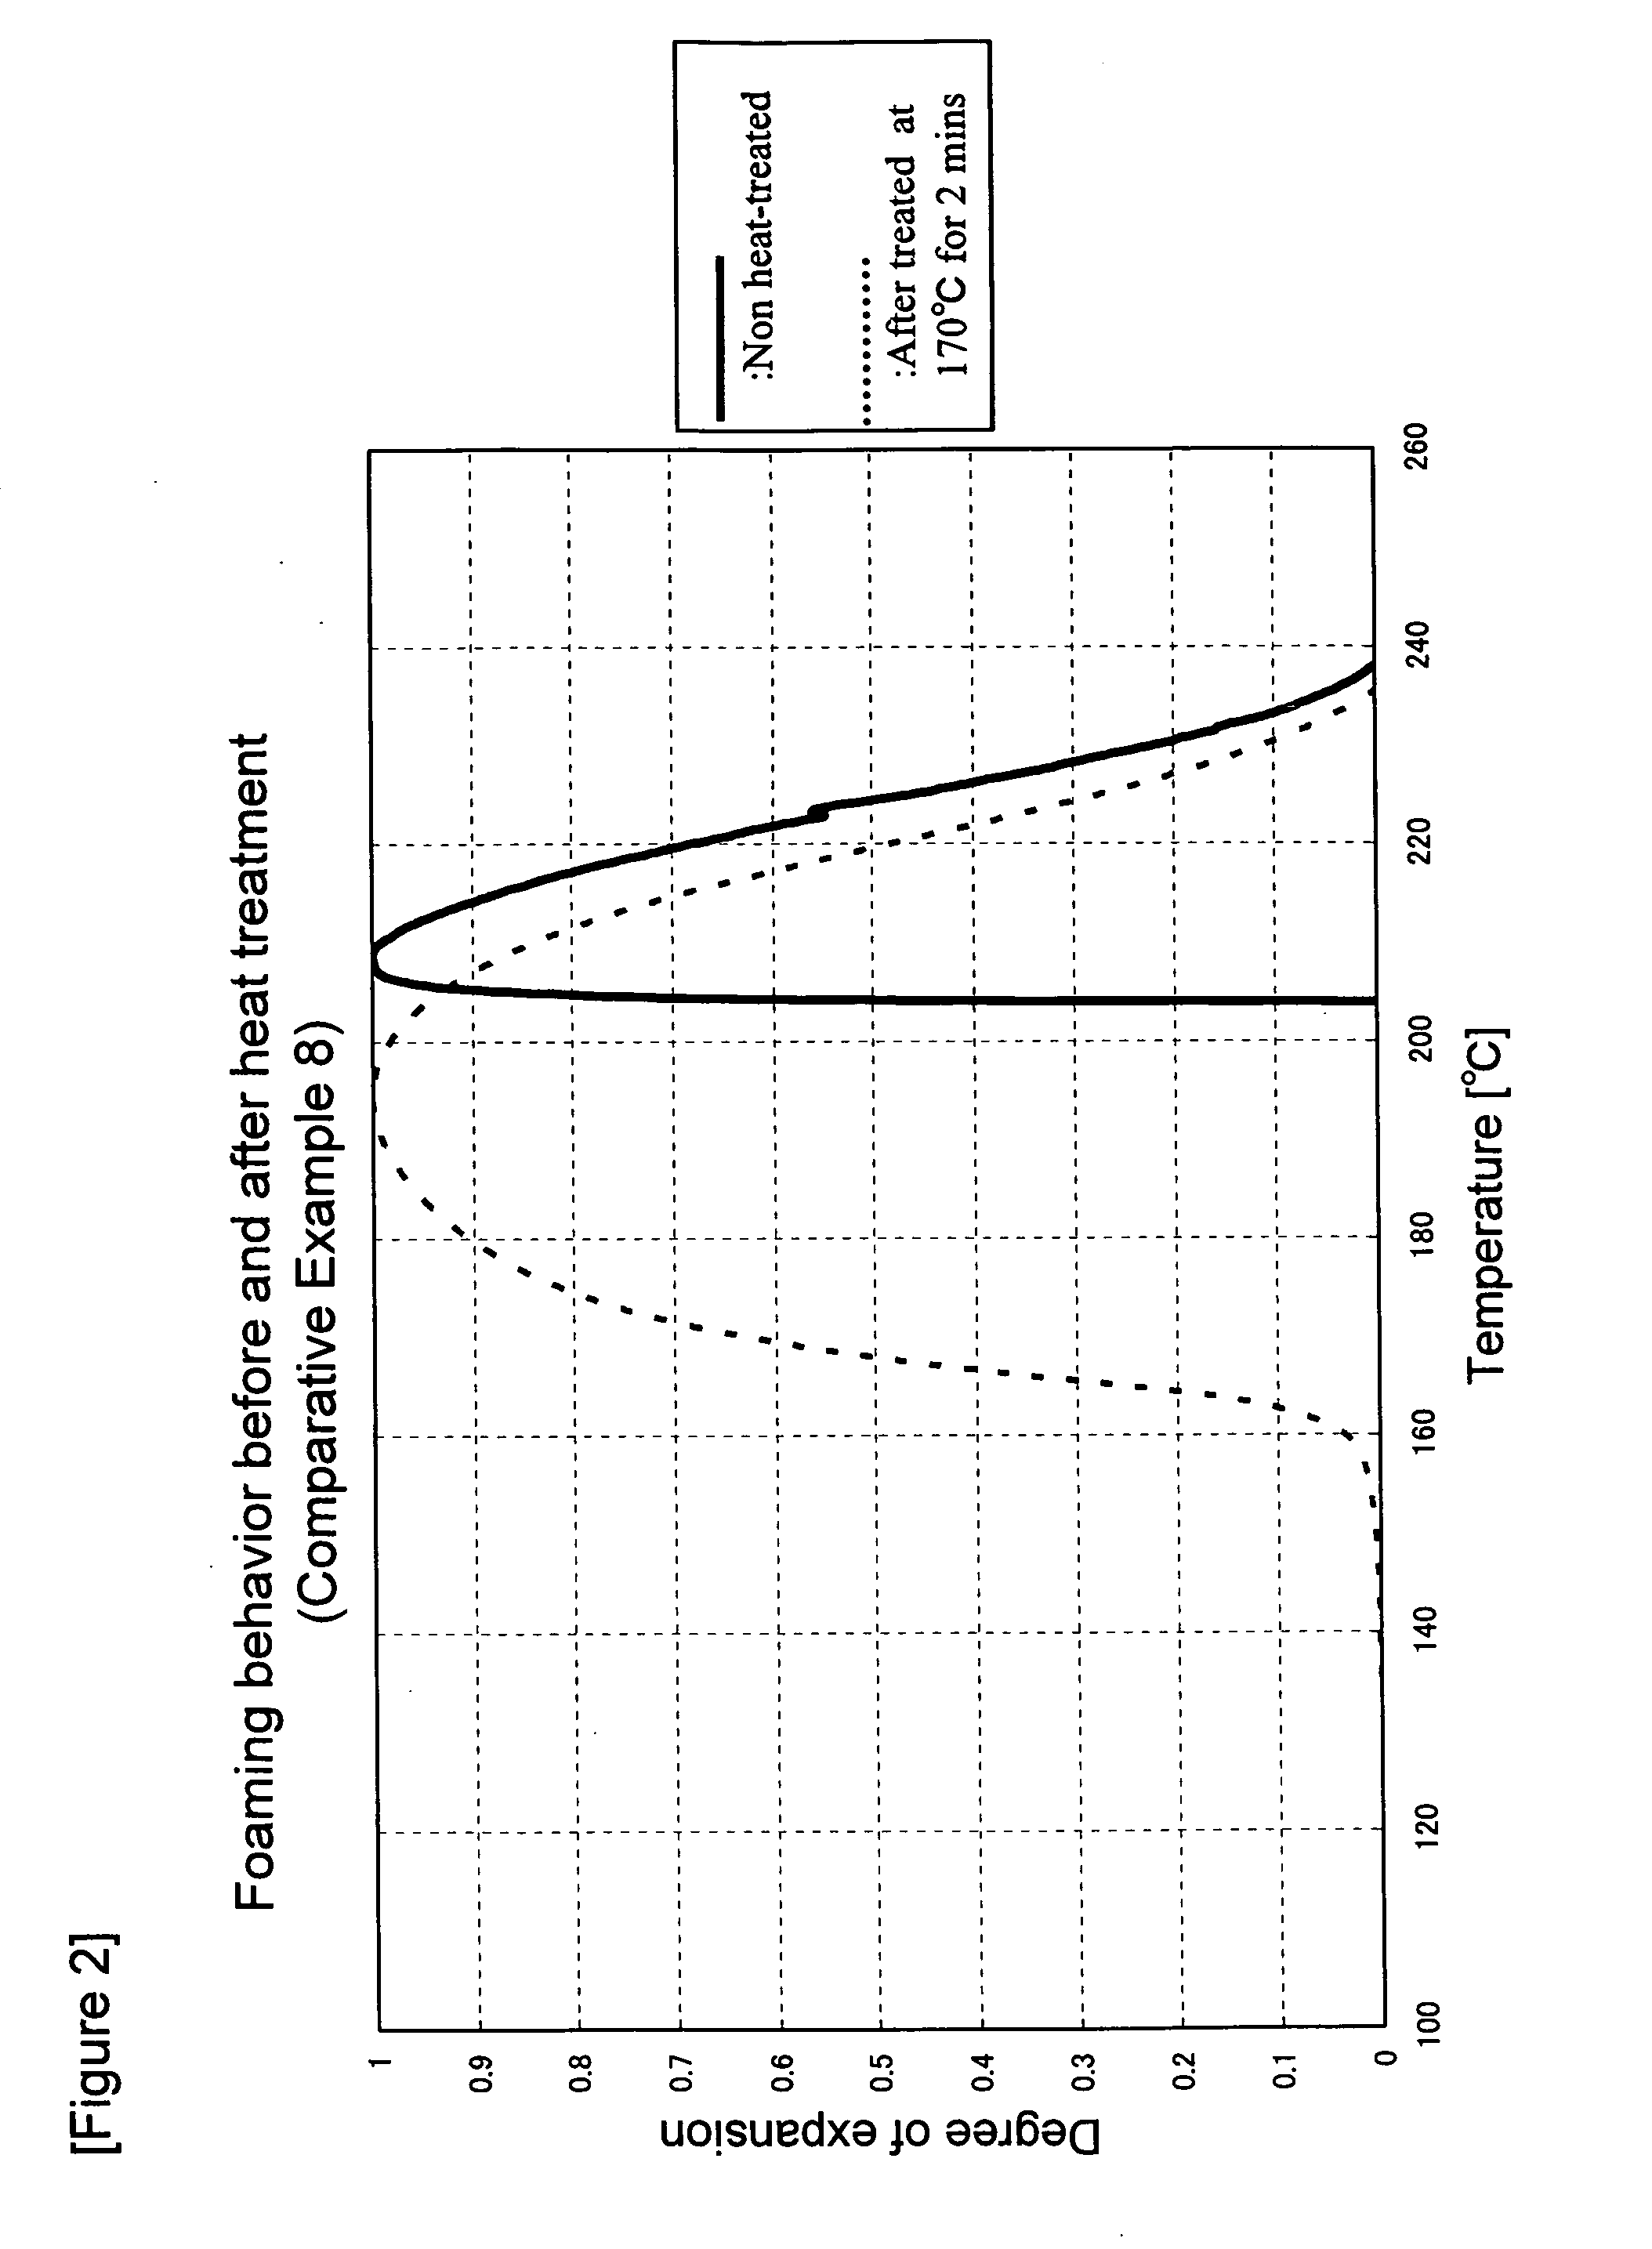 Thermally Foamable Microsphere, Method of Producing the Same, and Use Thereof